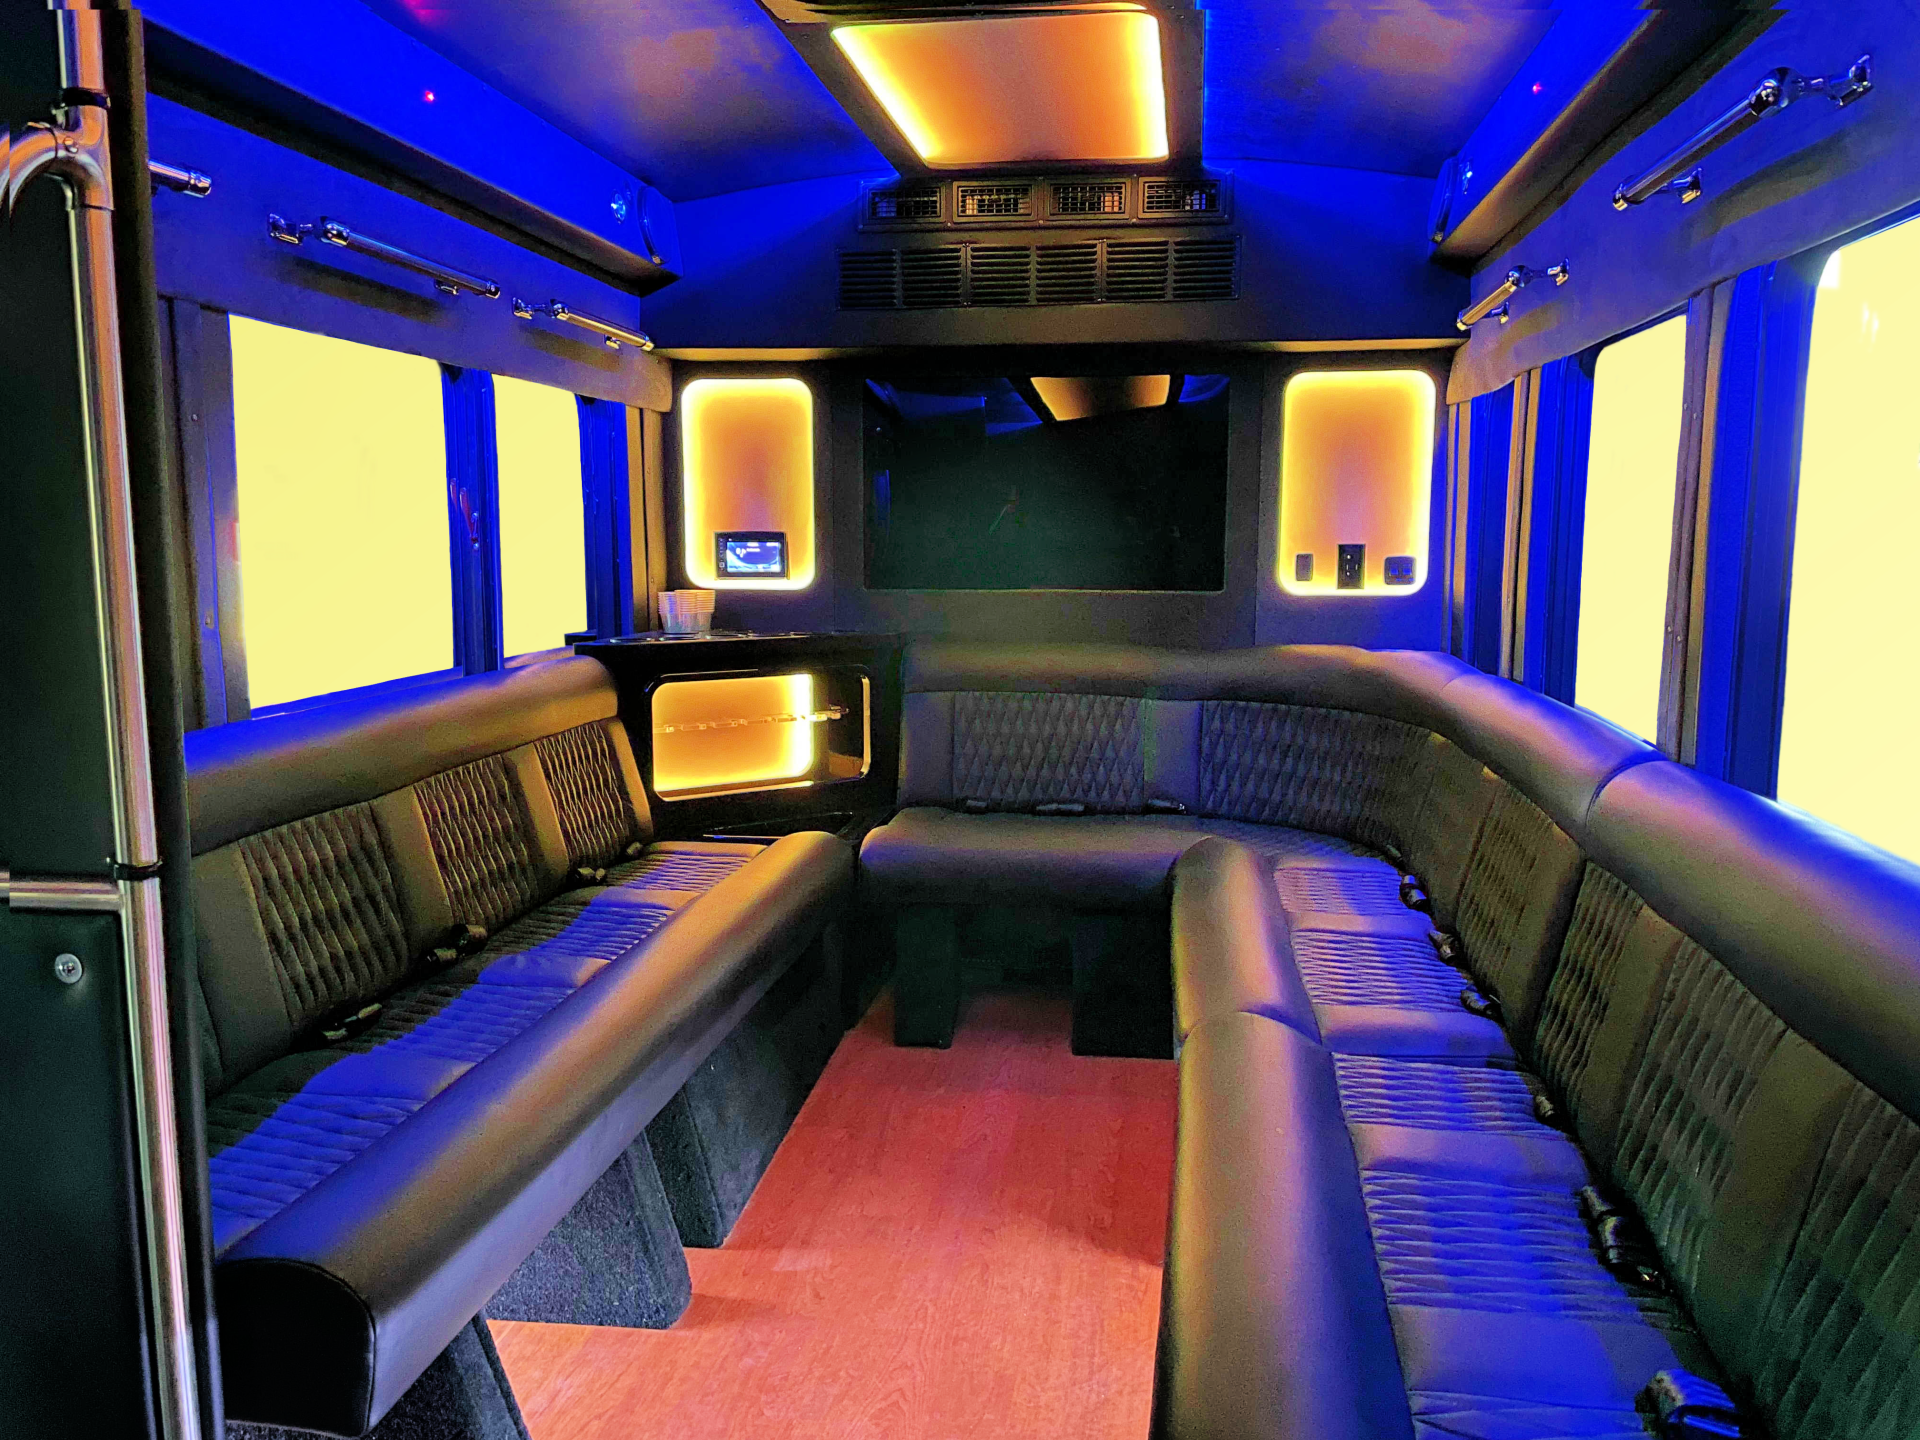 Limo To Go 12 passenger executive Transit Battisti party bus interior with LED gold lighting and Bentley style ultra plush seating